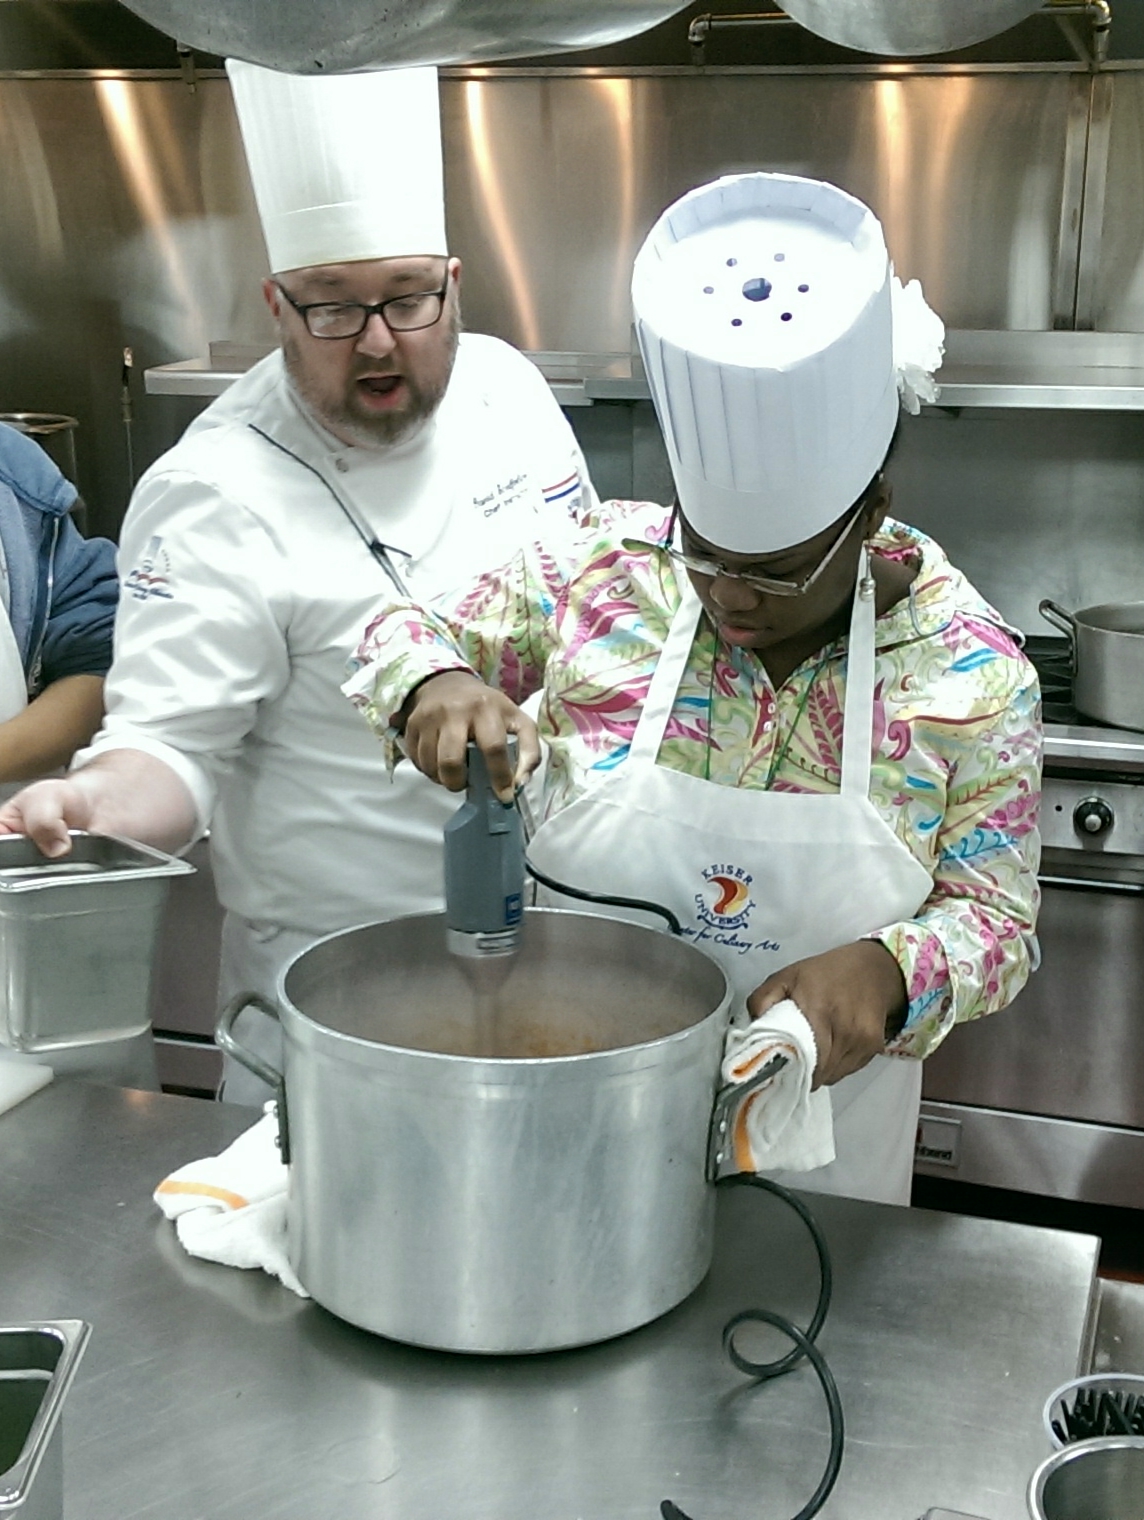 Klareesa Williams indicated that she really enjoyed the event and it allowed her to becoming more comfortable in a kitchen environment.